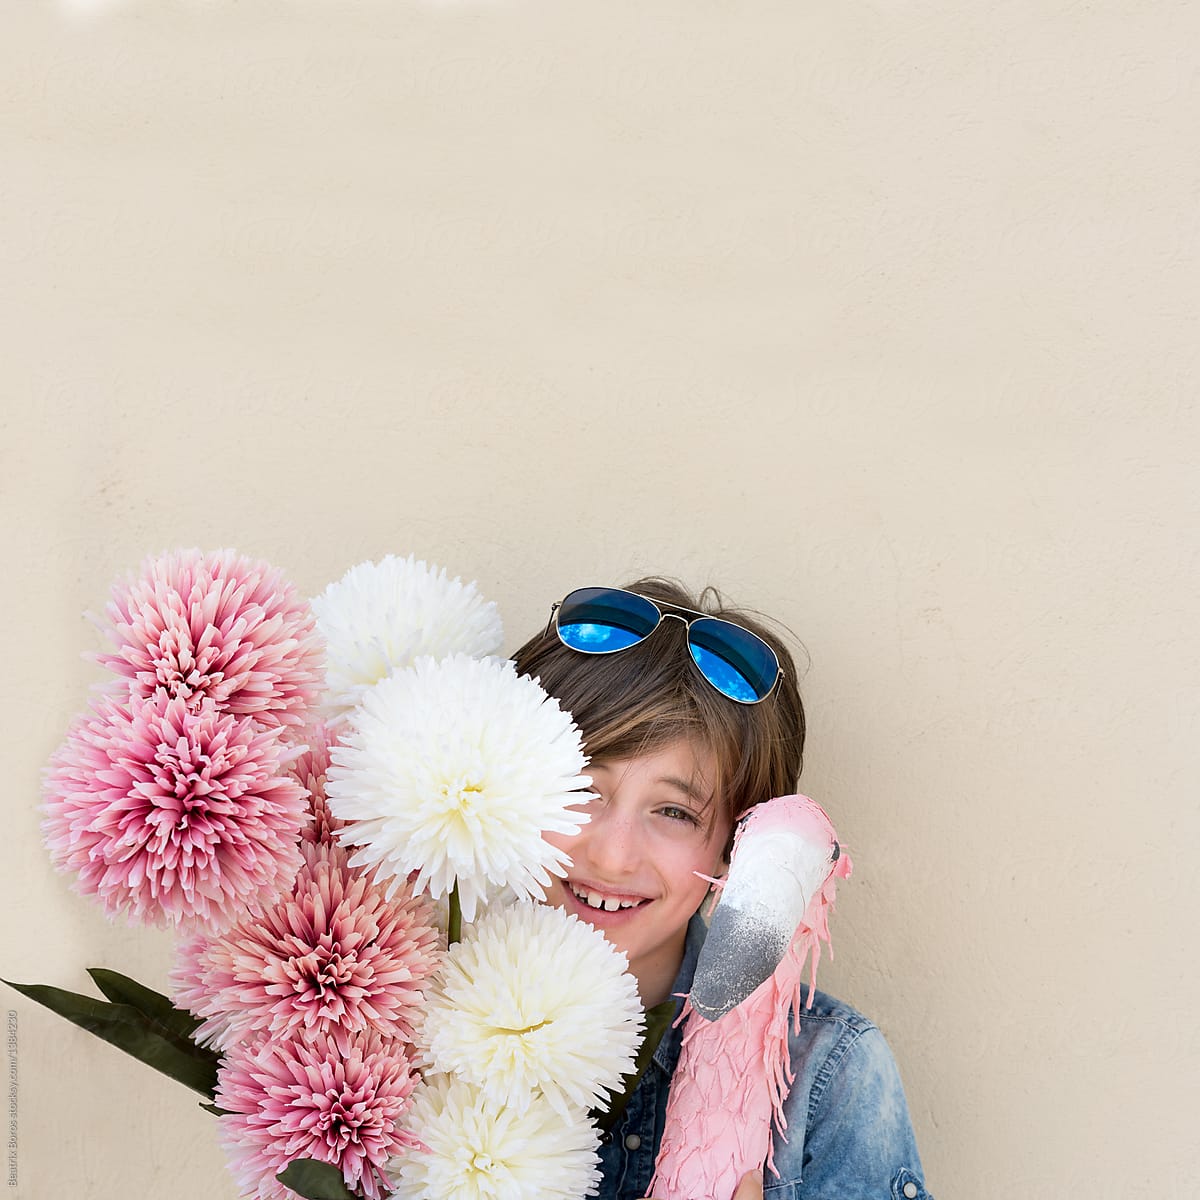 Boy smiling at camera, while holding many flowers